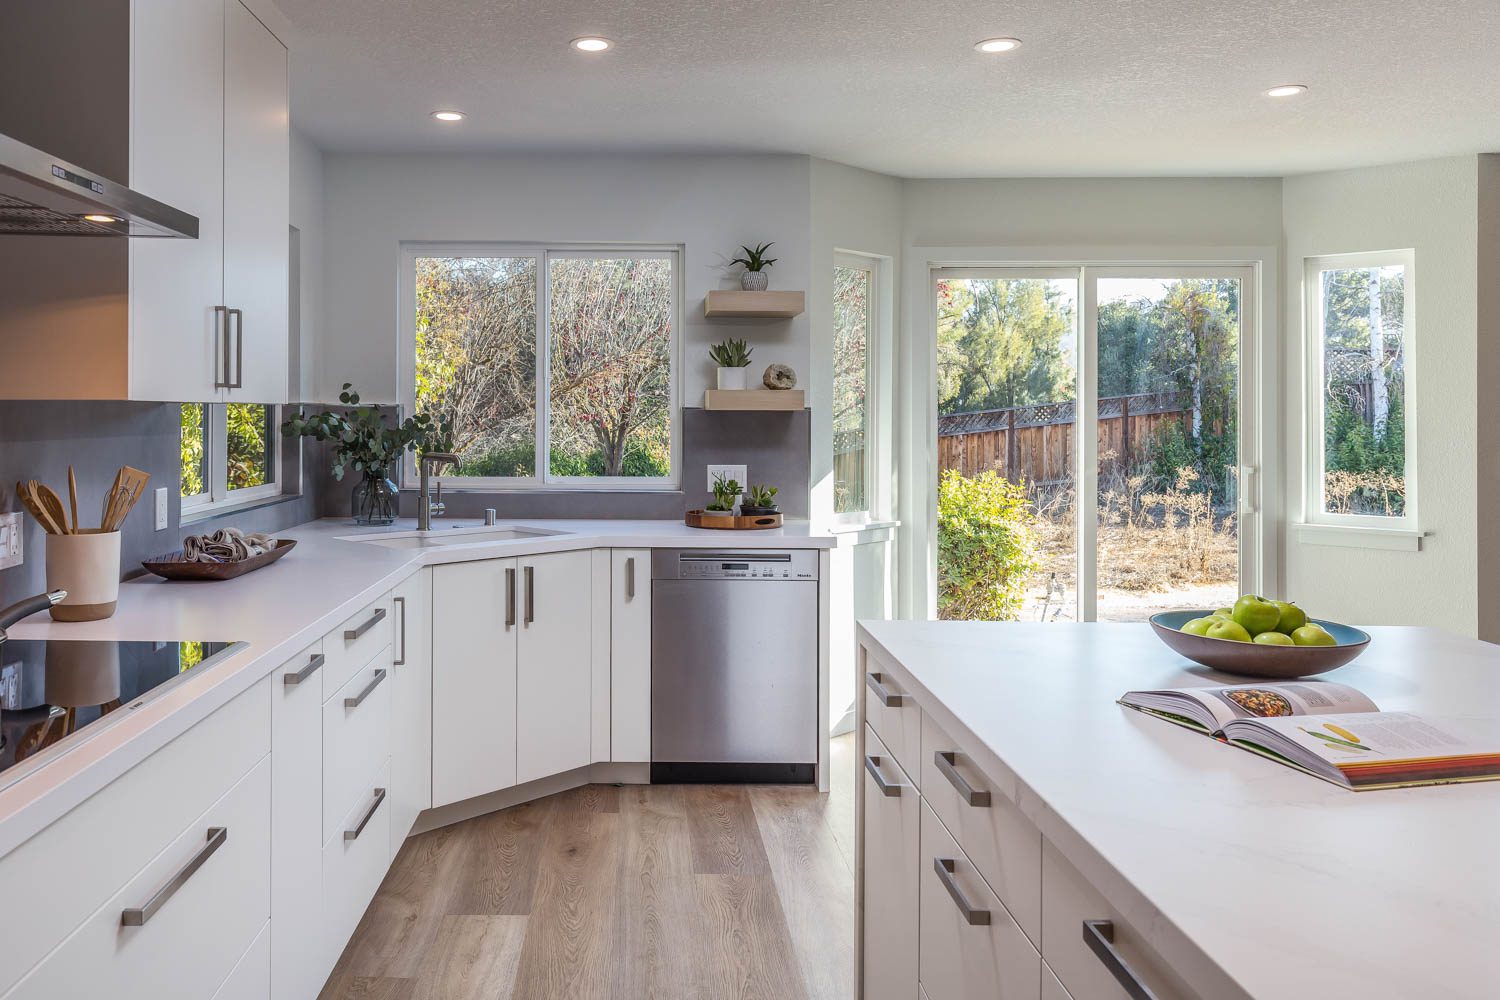 A-kitchen-remodel-mistake-to-avoid-is-mismatched-appliances